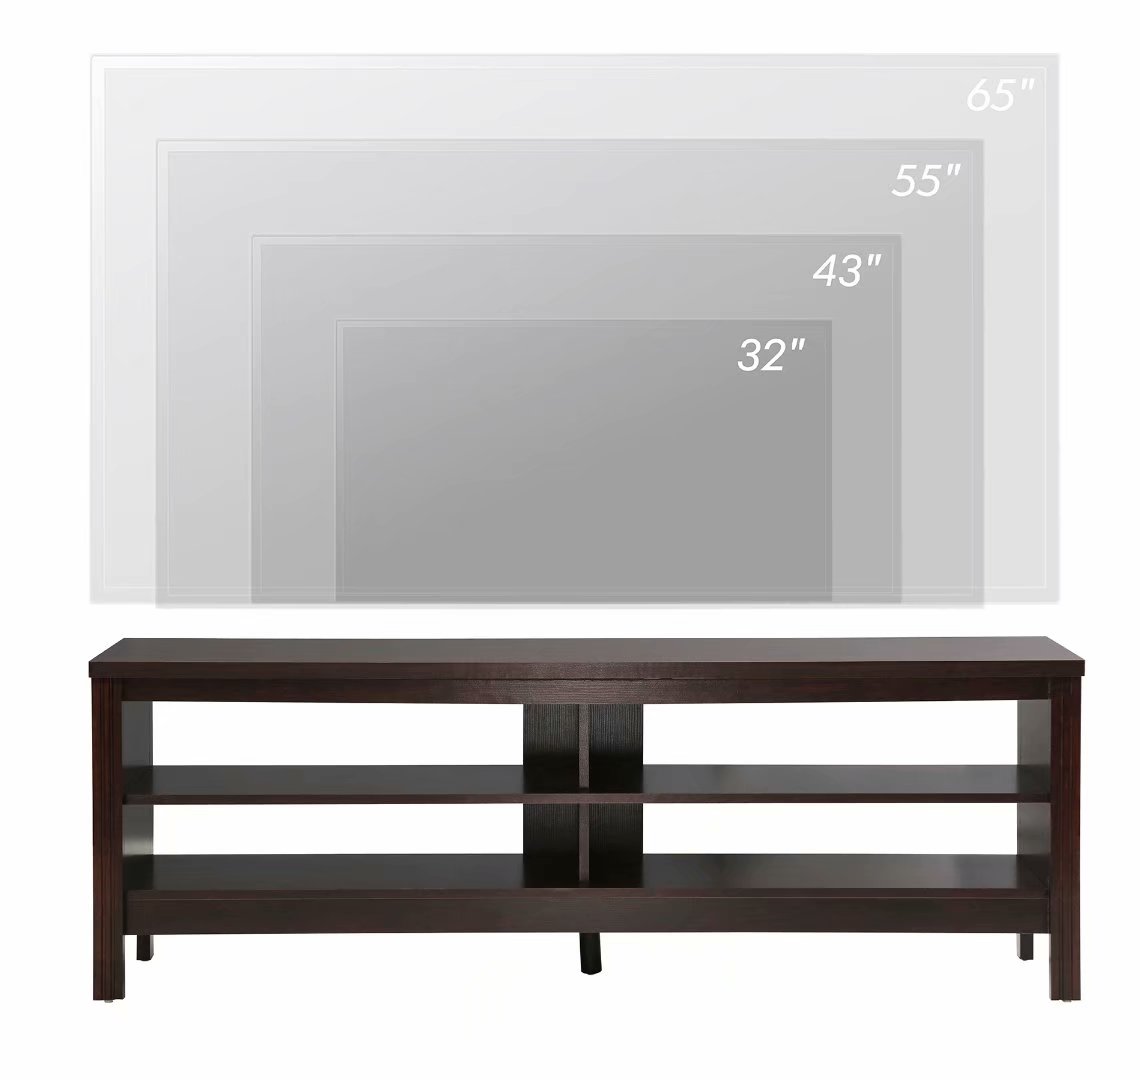 Farmhouse TV Stands for 65 inch Flat Screen,Wood Media Console for bedroom and living room,59 inch,Walnut - image 3 of 5